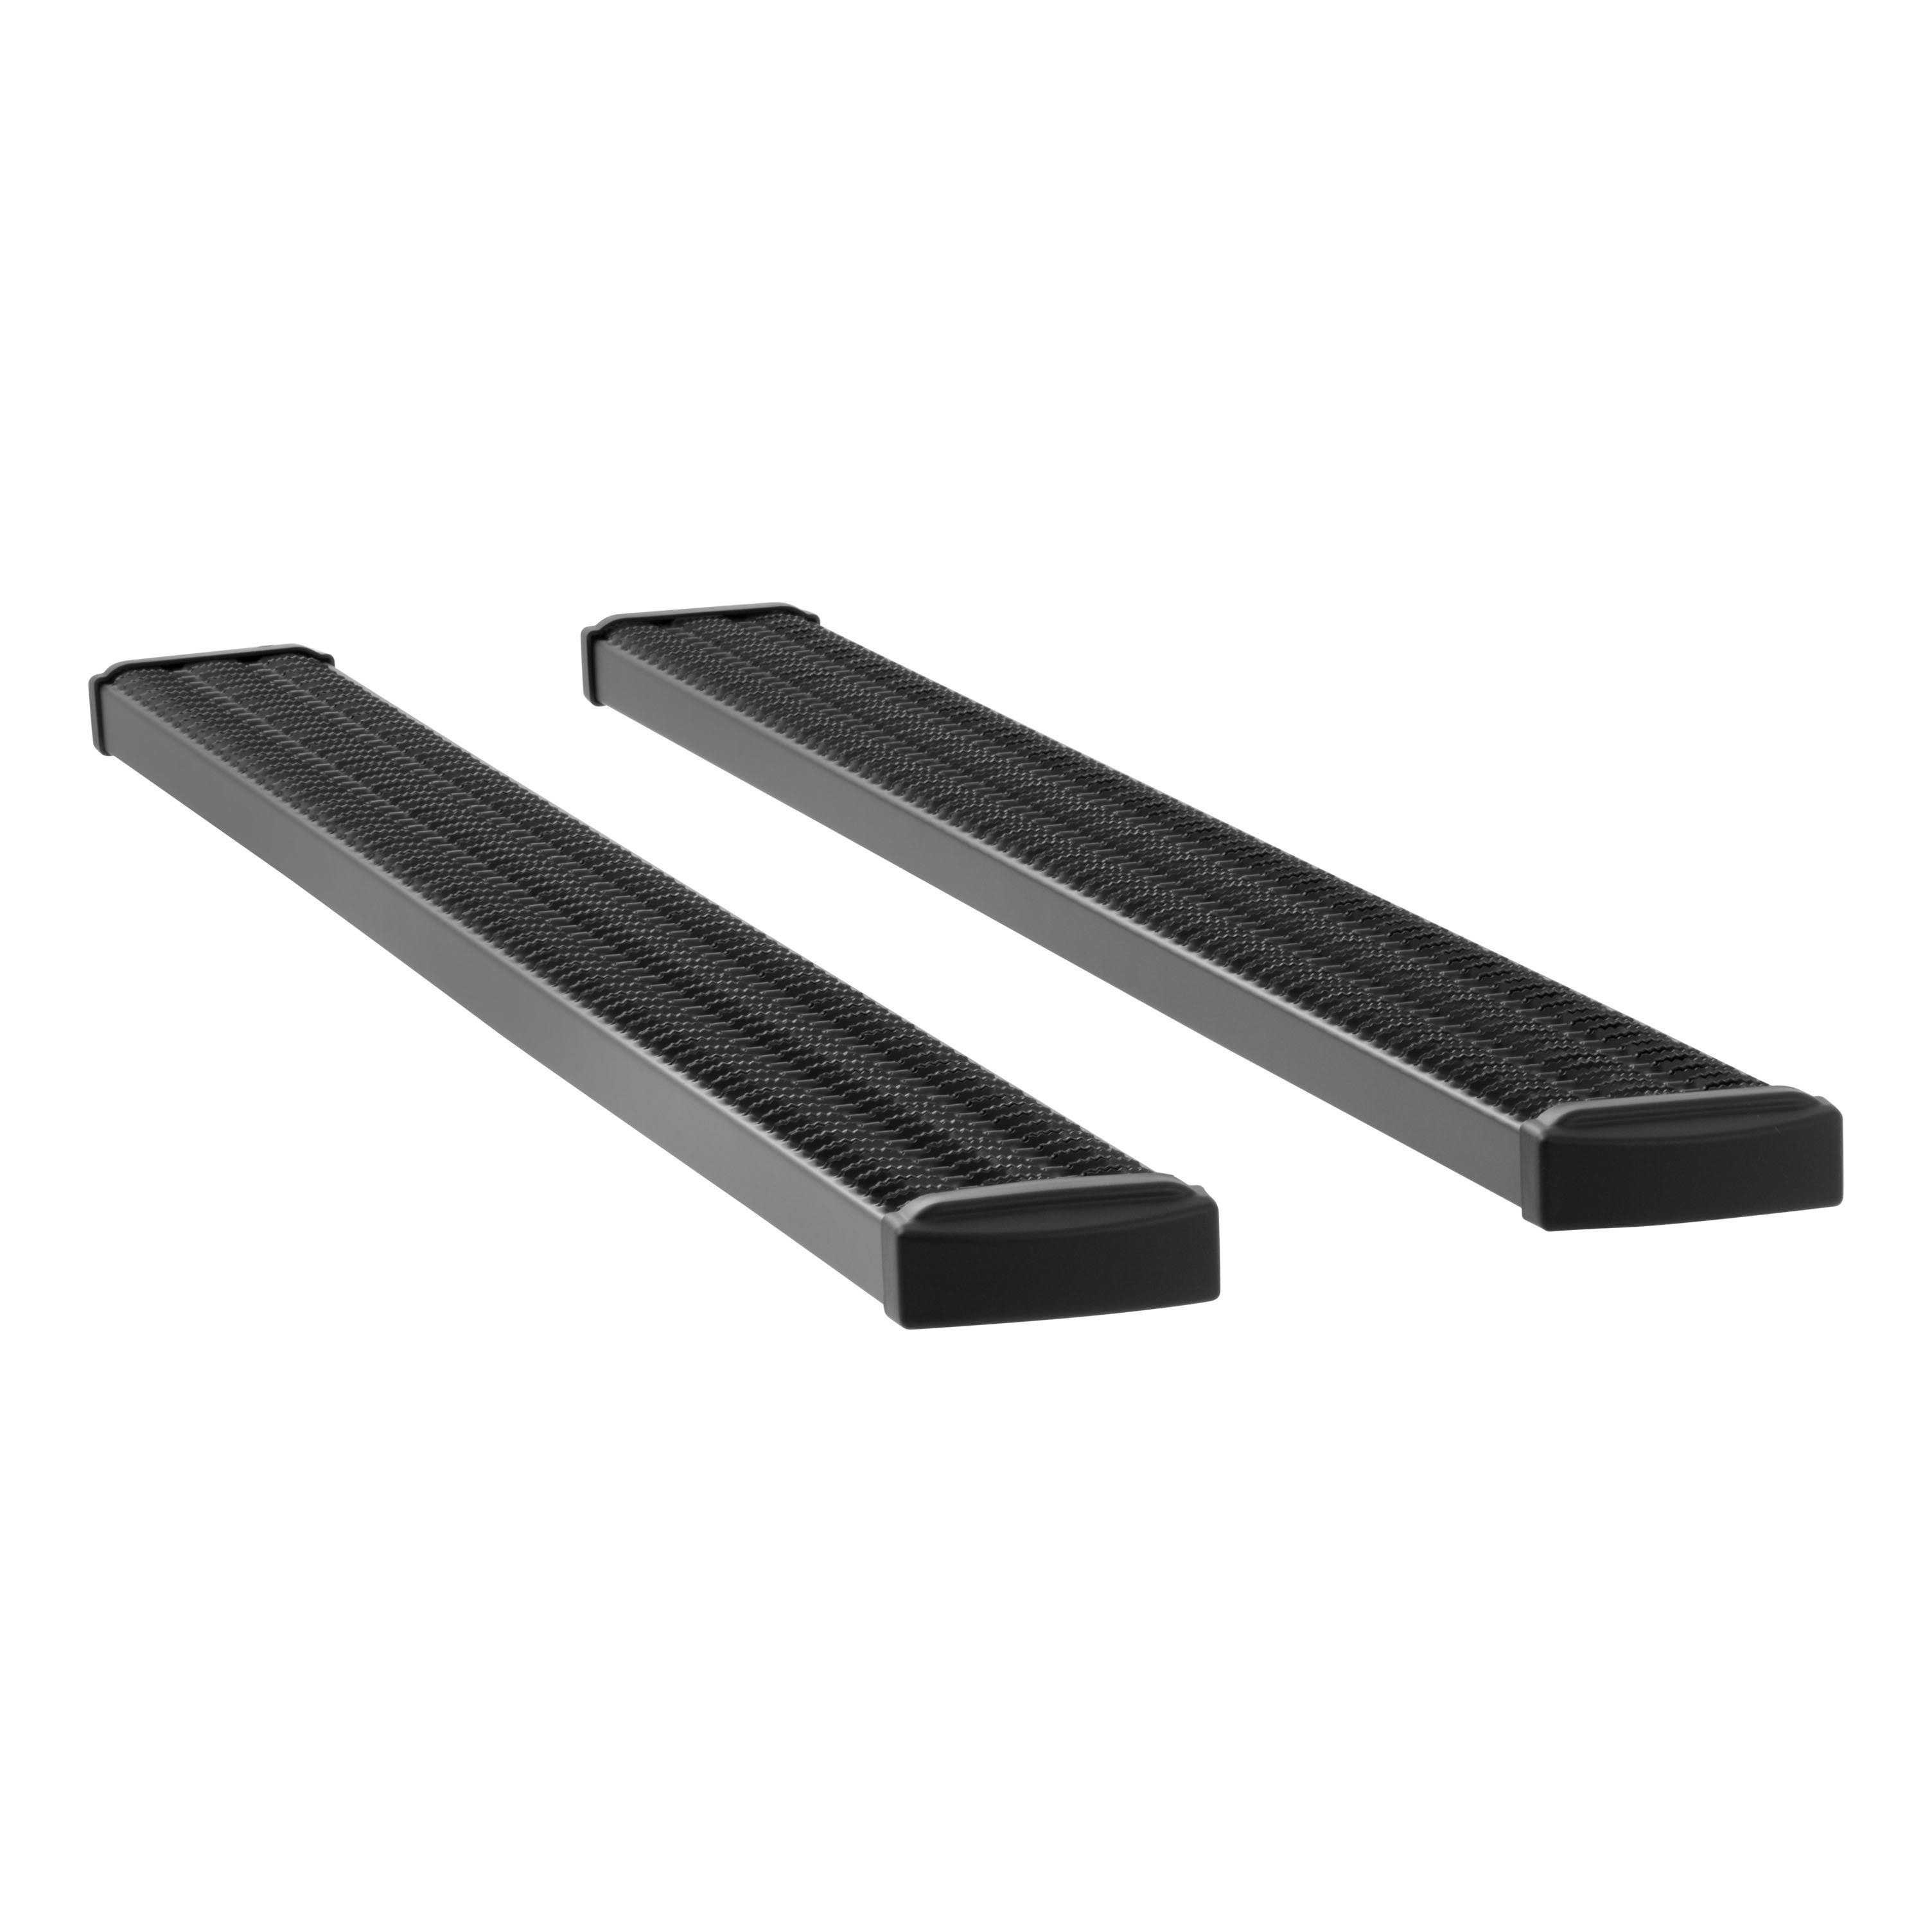 LUVERNE 415088-401731 Grip Step 7 inch Running Boards with XD Bracket System